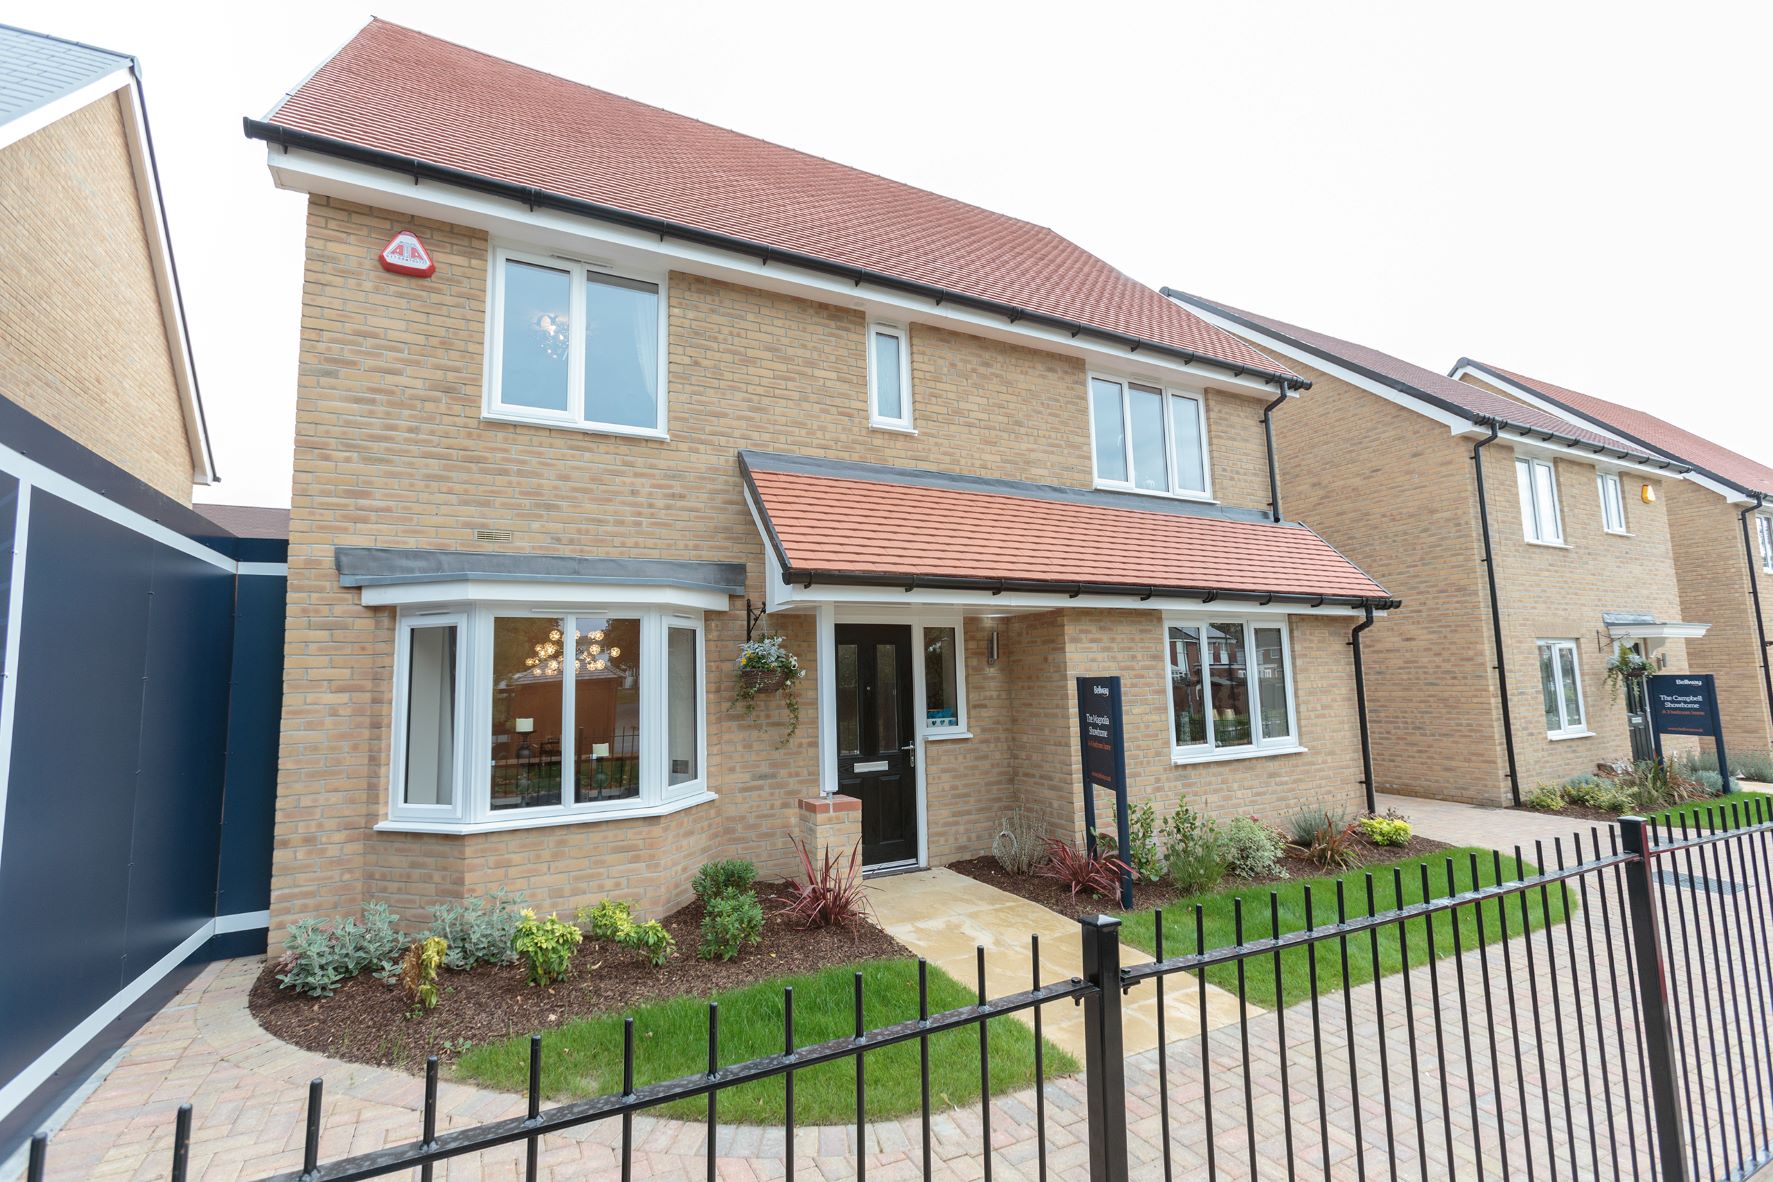 Almost All Homes Sold at Rivenhall Park Development